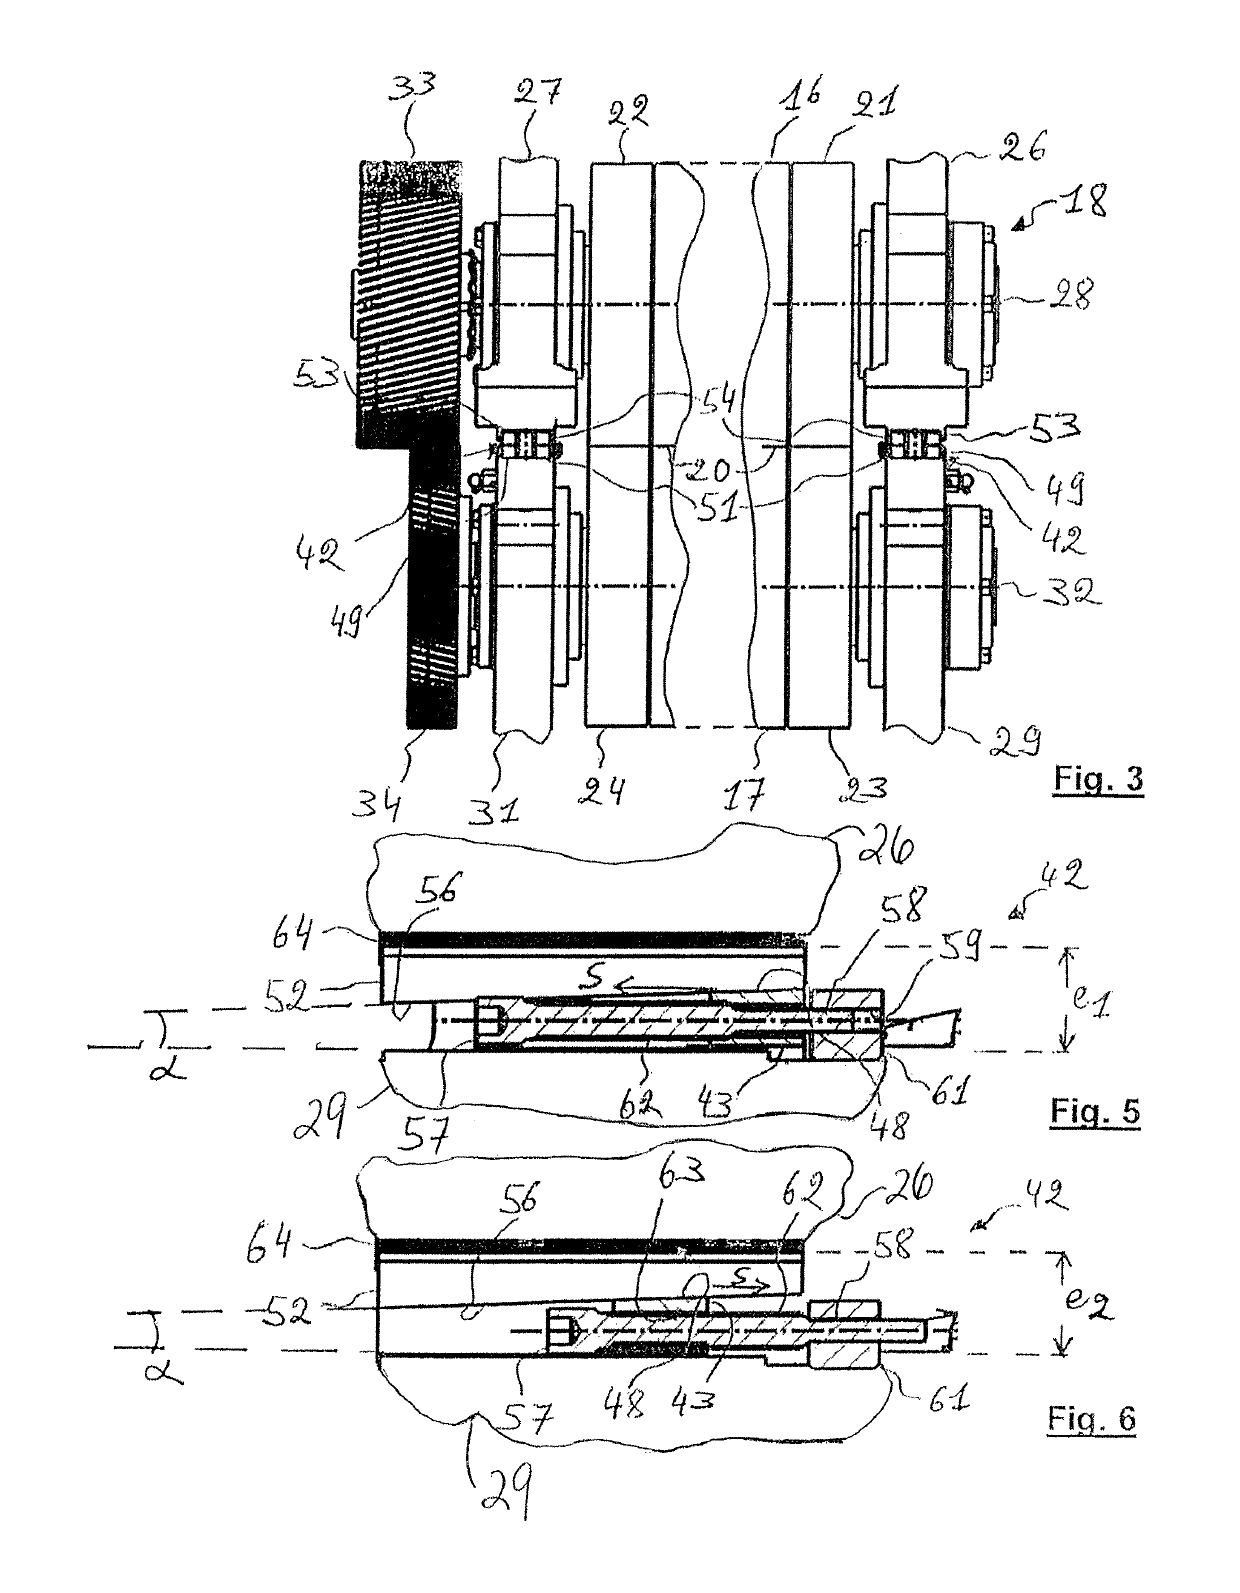 Adjustable converting arrangement for a flat substrate, cassette, unit and machine provided therewith